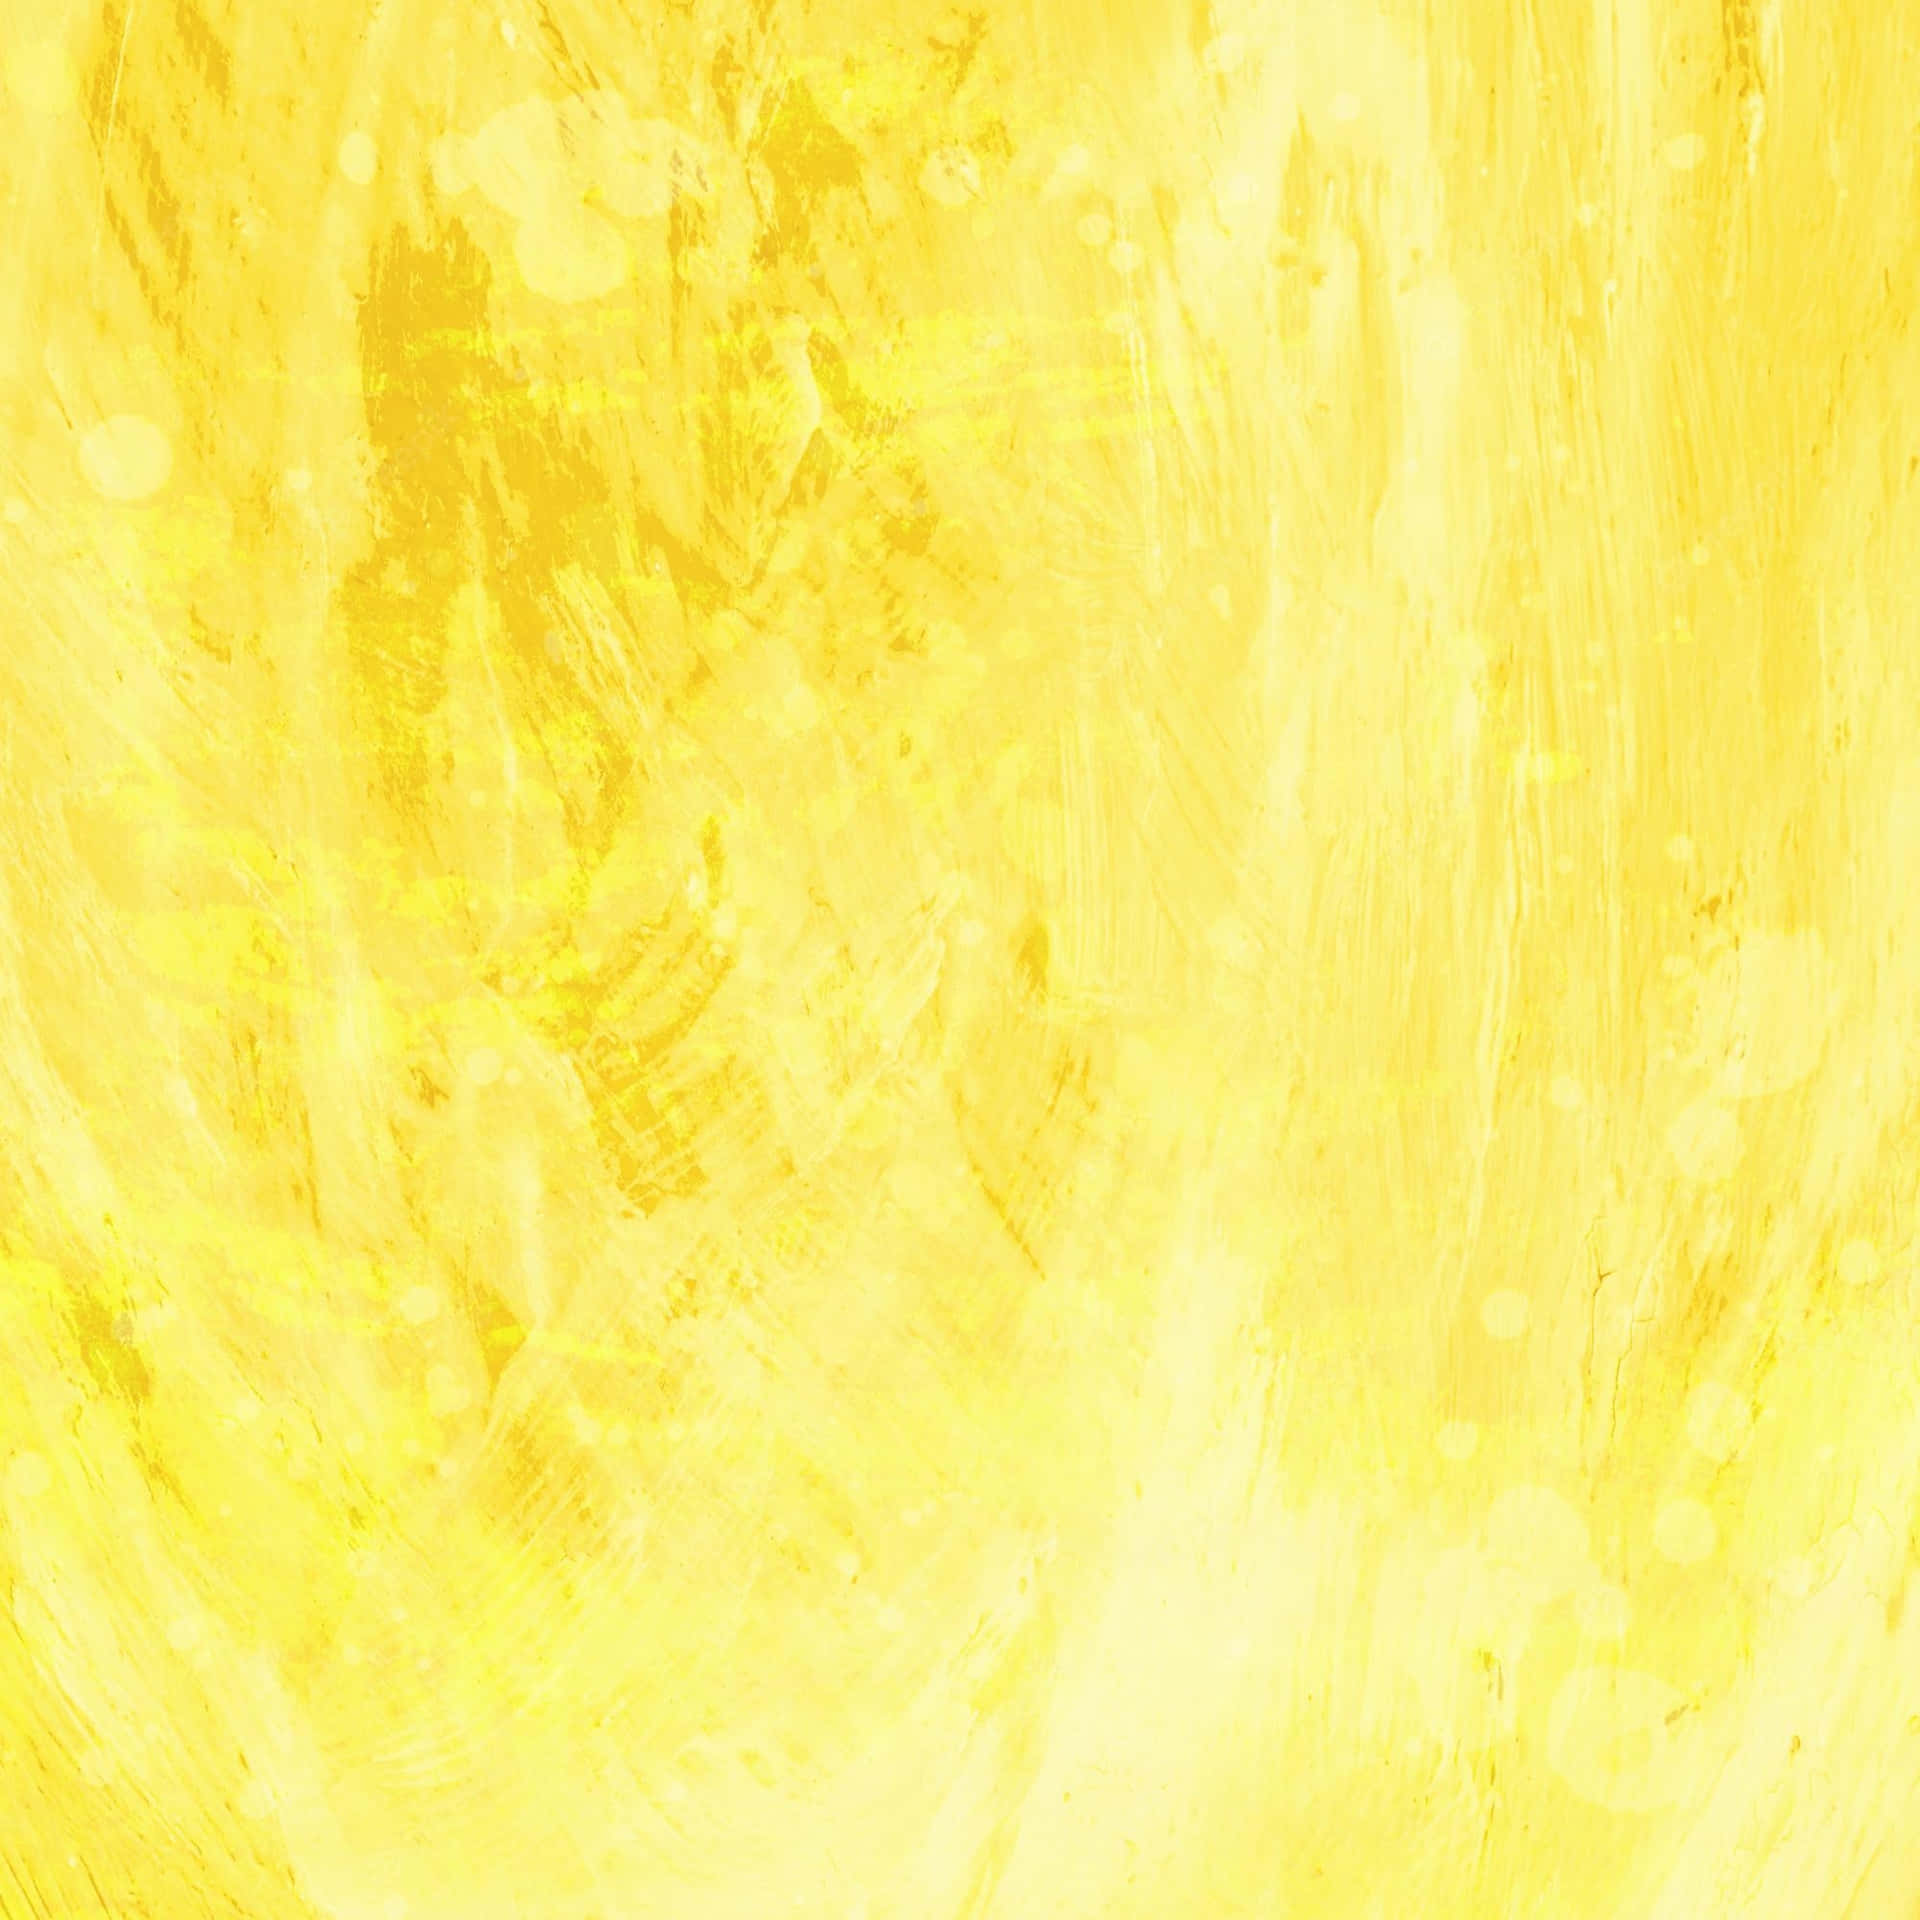 A Yellow Abstract Painting With A Swirl Of Paint Wallpaper